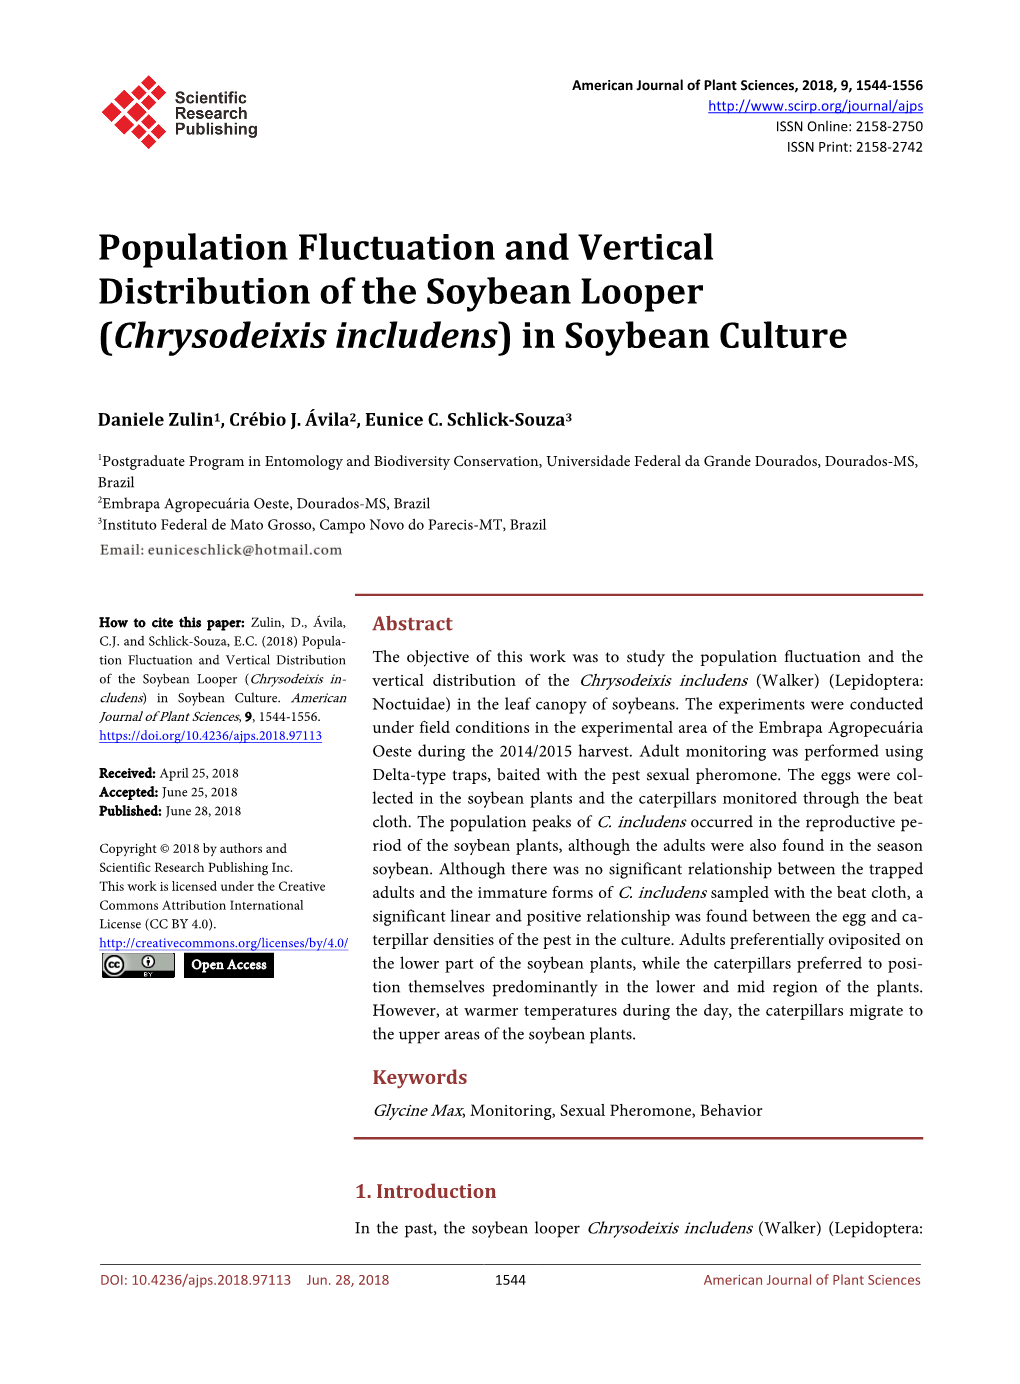 Population Fluctuation and Vertical Distribution of the Soybean Looper (Chrysodeixis Includens) in Soybean Culture